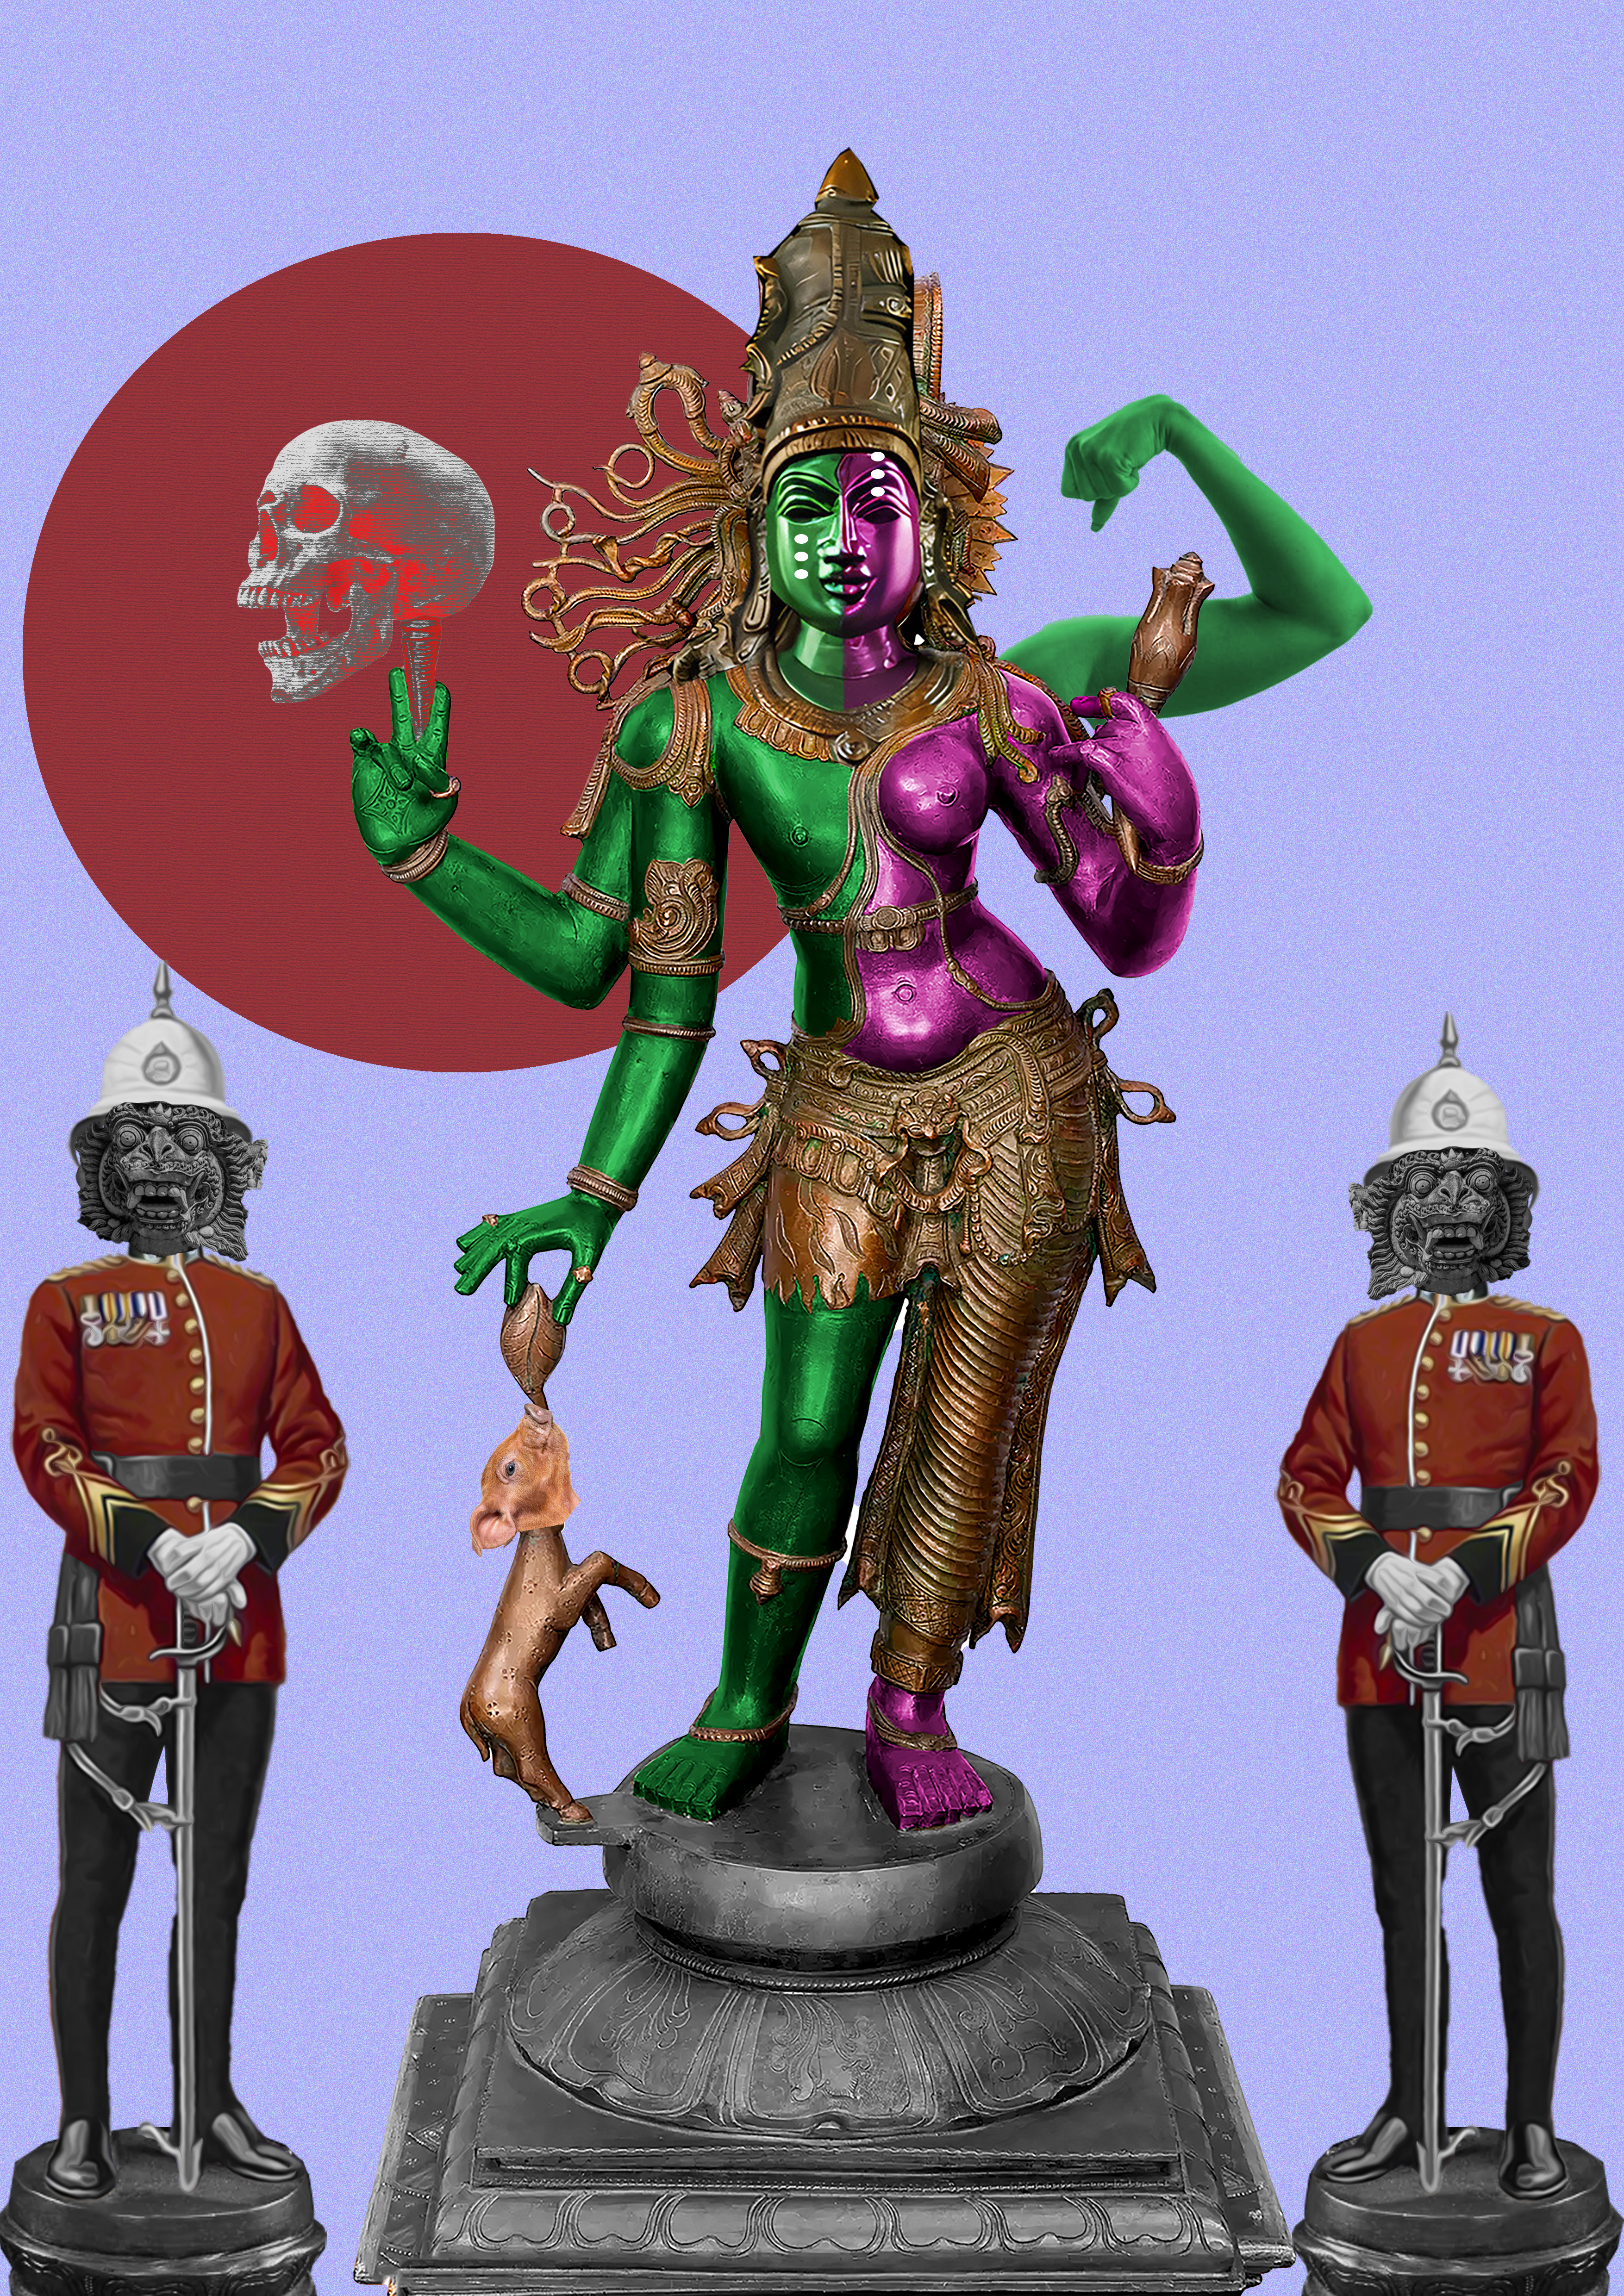 An Indian god in green and pink is in the middle of the artwork, to the left and right are temple guardians.